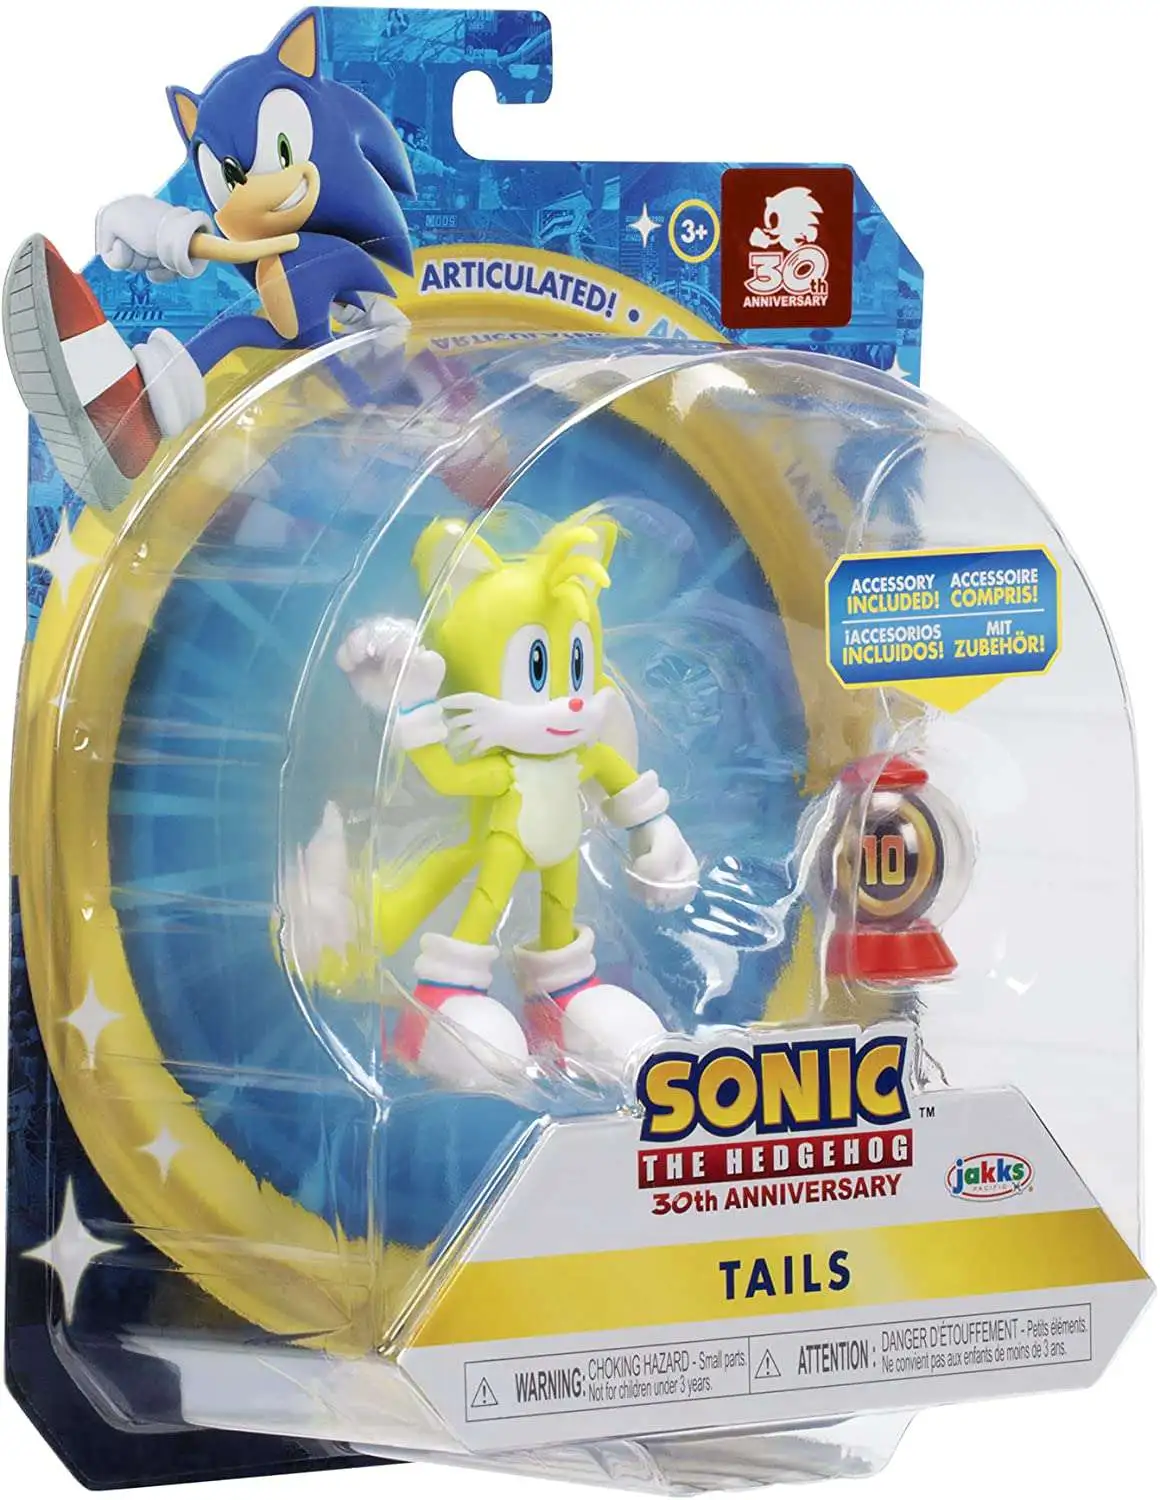  Sonic the Hedgehog 4 Tails with Checkpoint Action